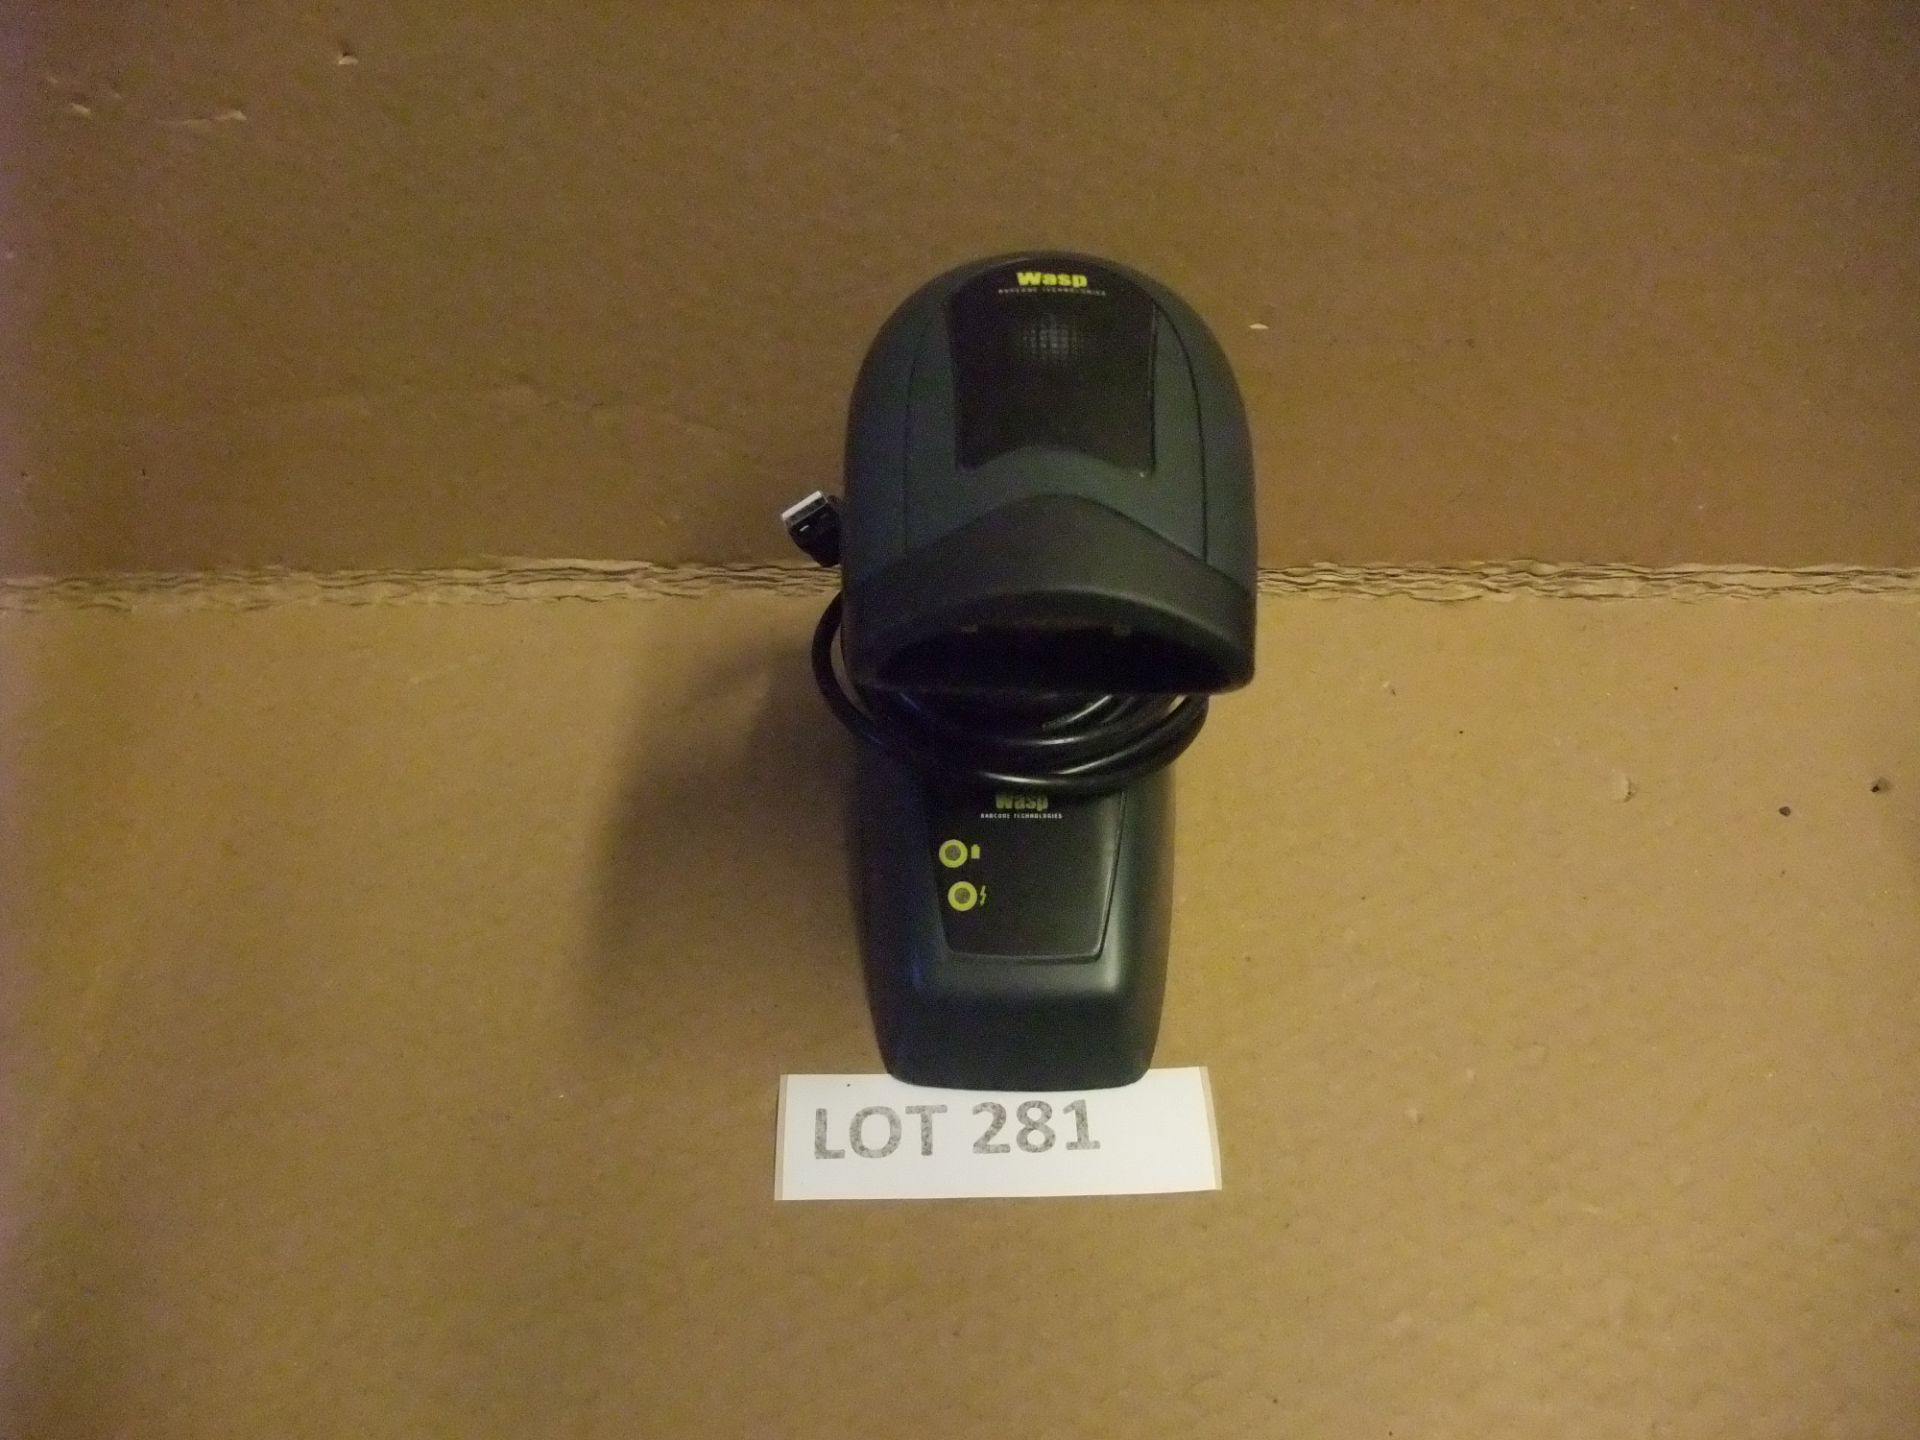 Wasp WWS650 Wireless Barcode Scanner (with WWS650-BS USB Base)Please read the following important